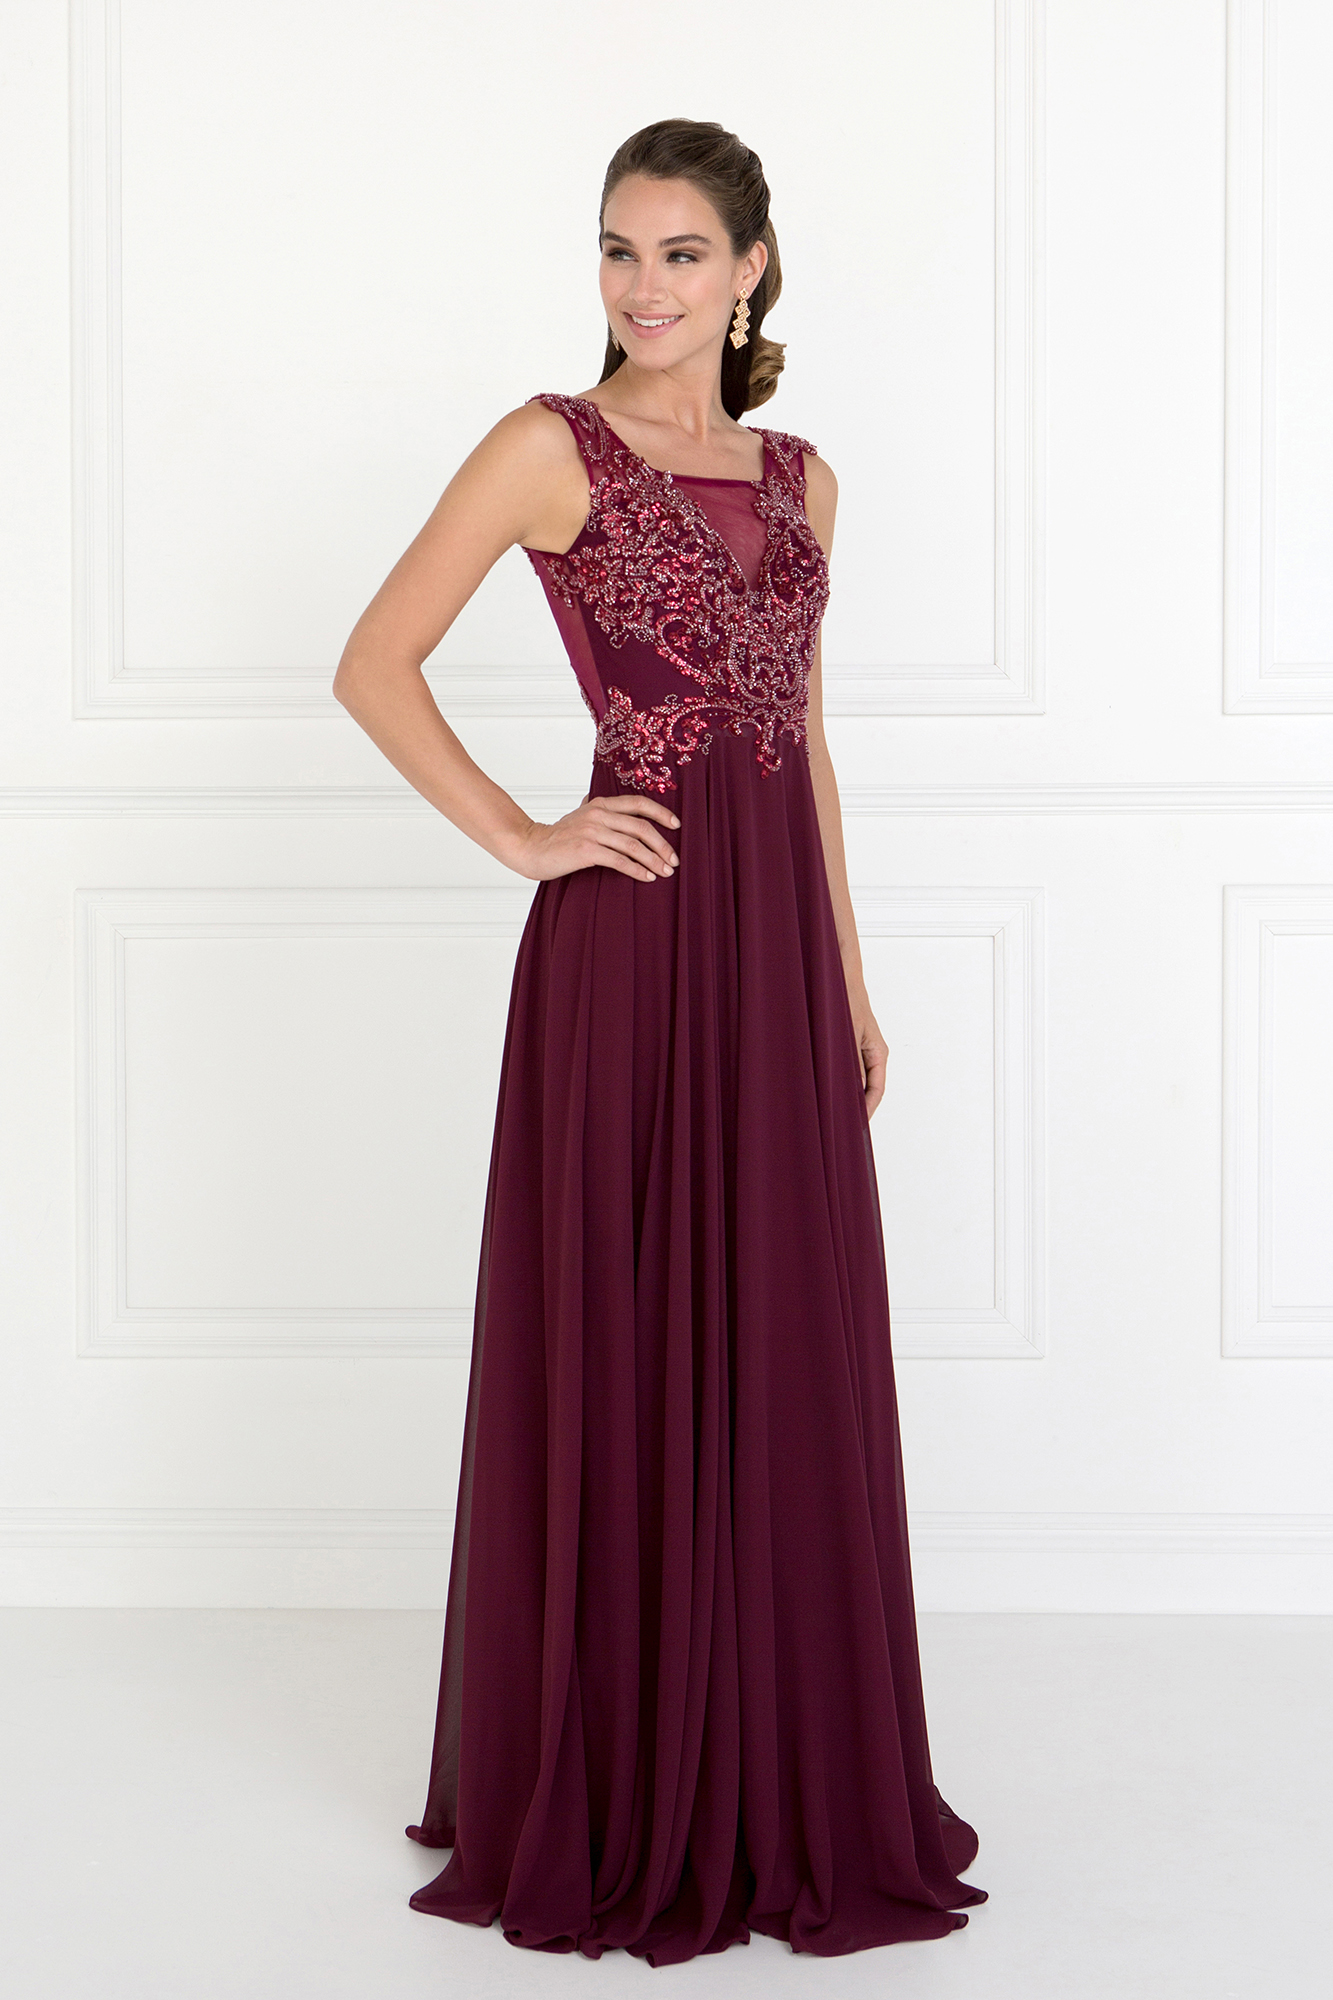 woman in burgundy gown